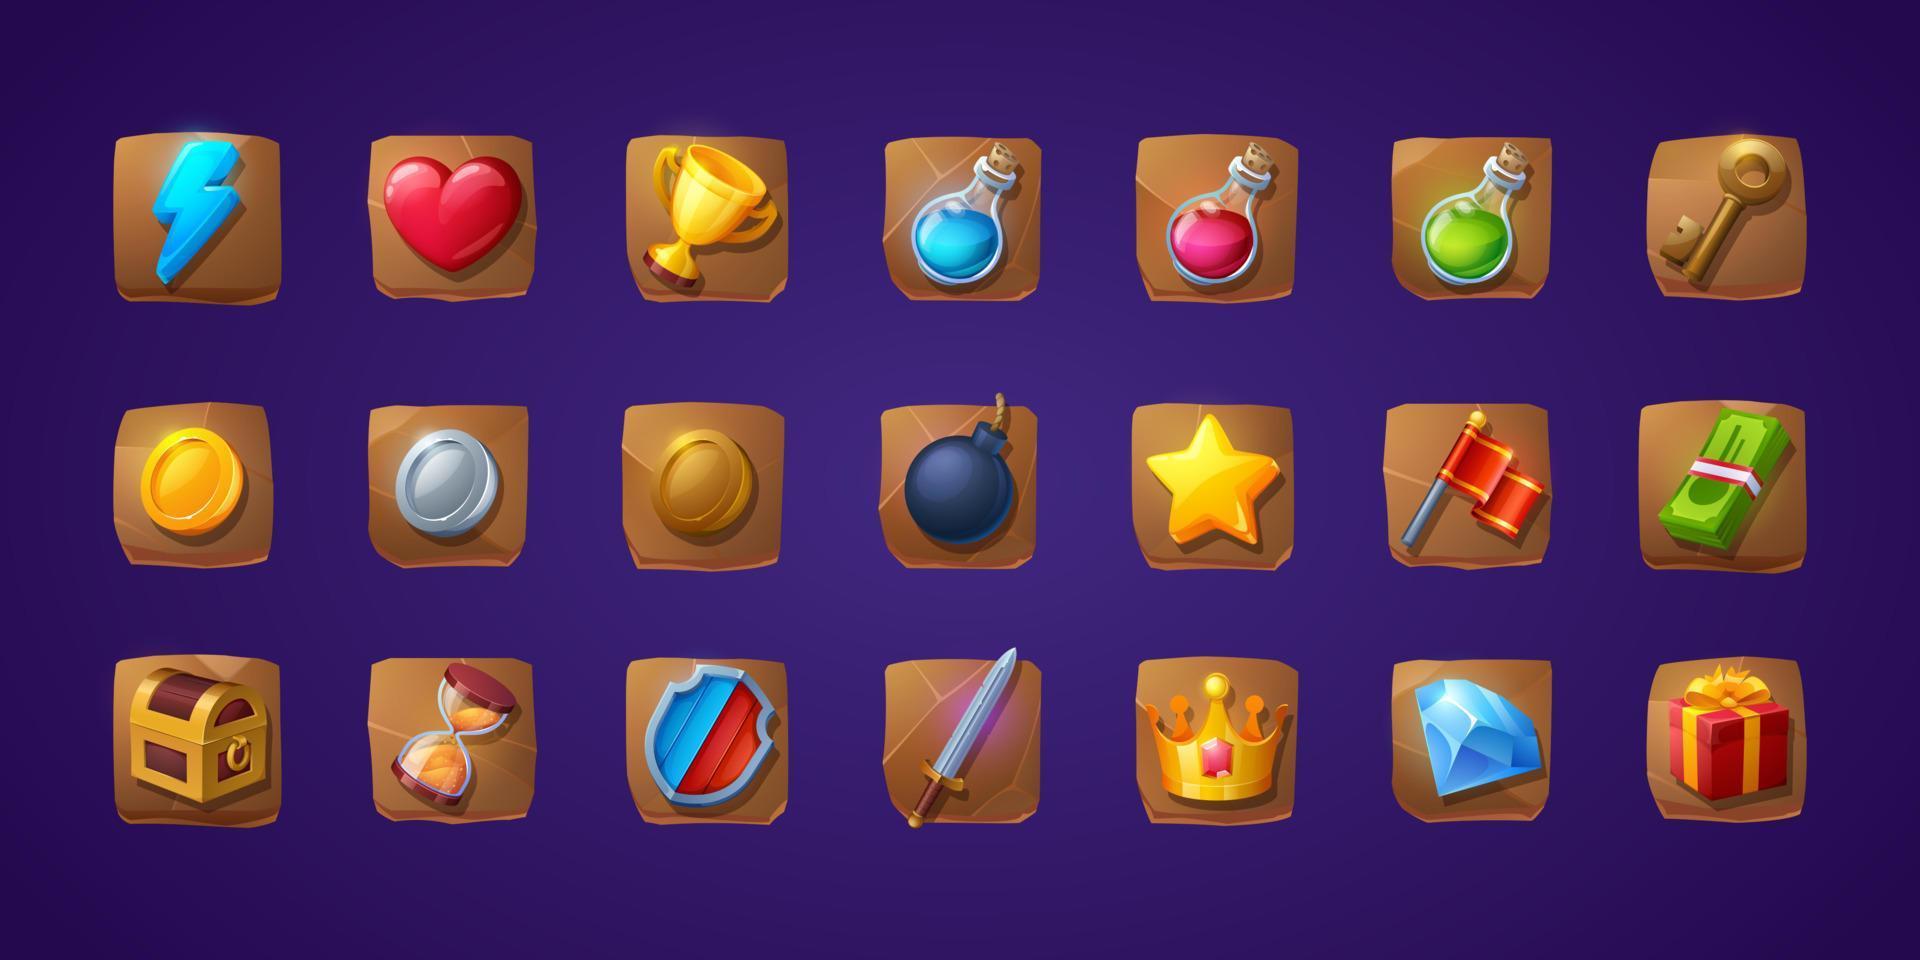 Set of game icons or buttons. Cartoon ui elements vector